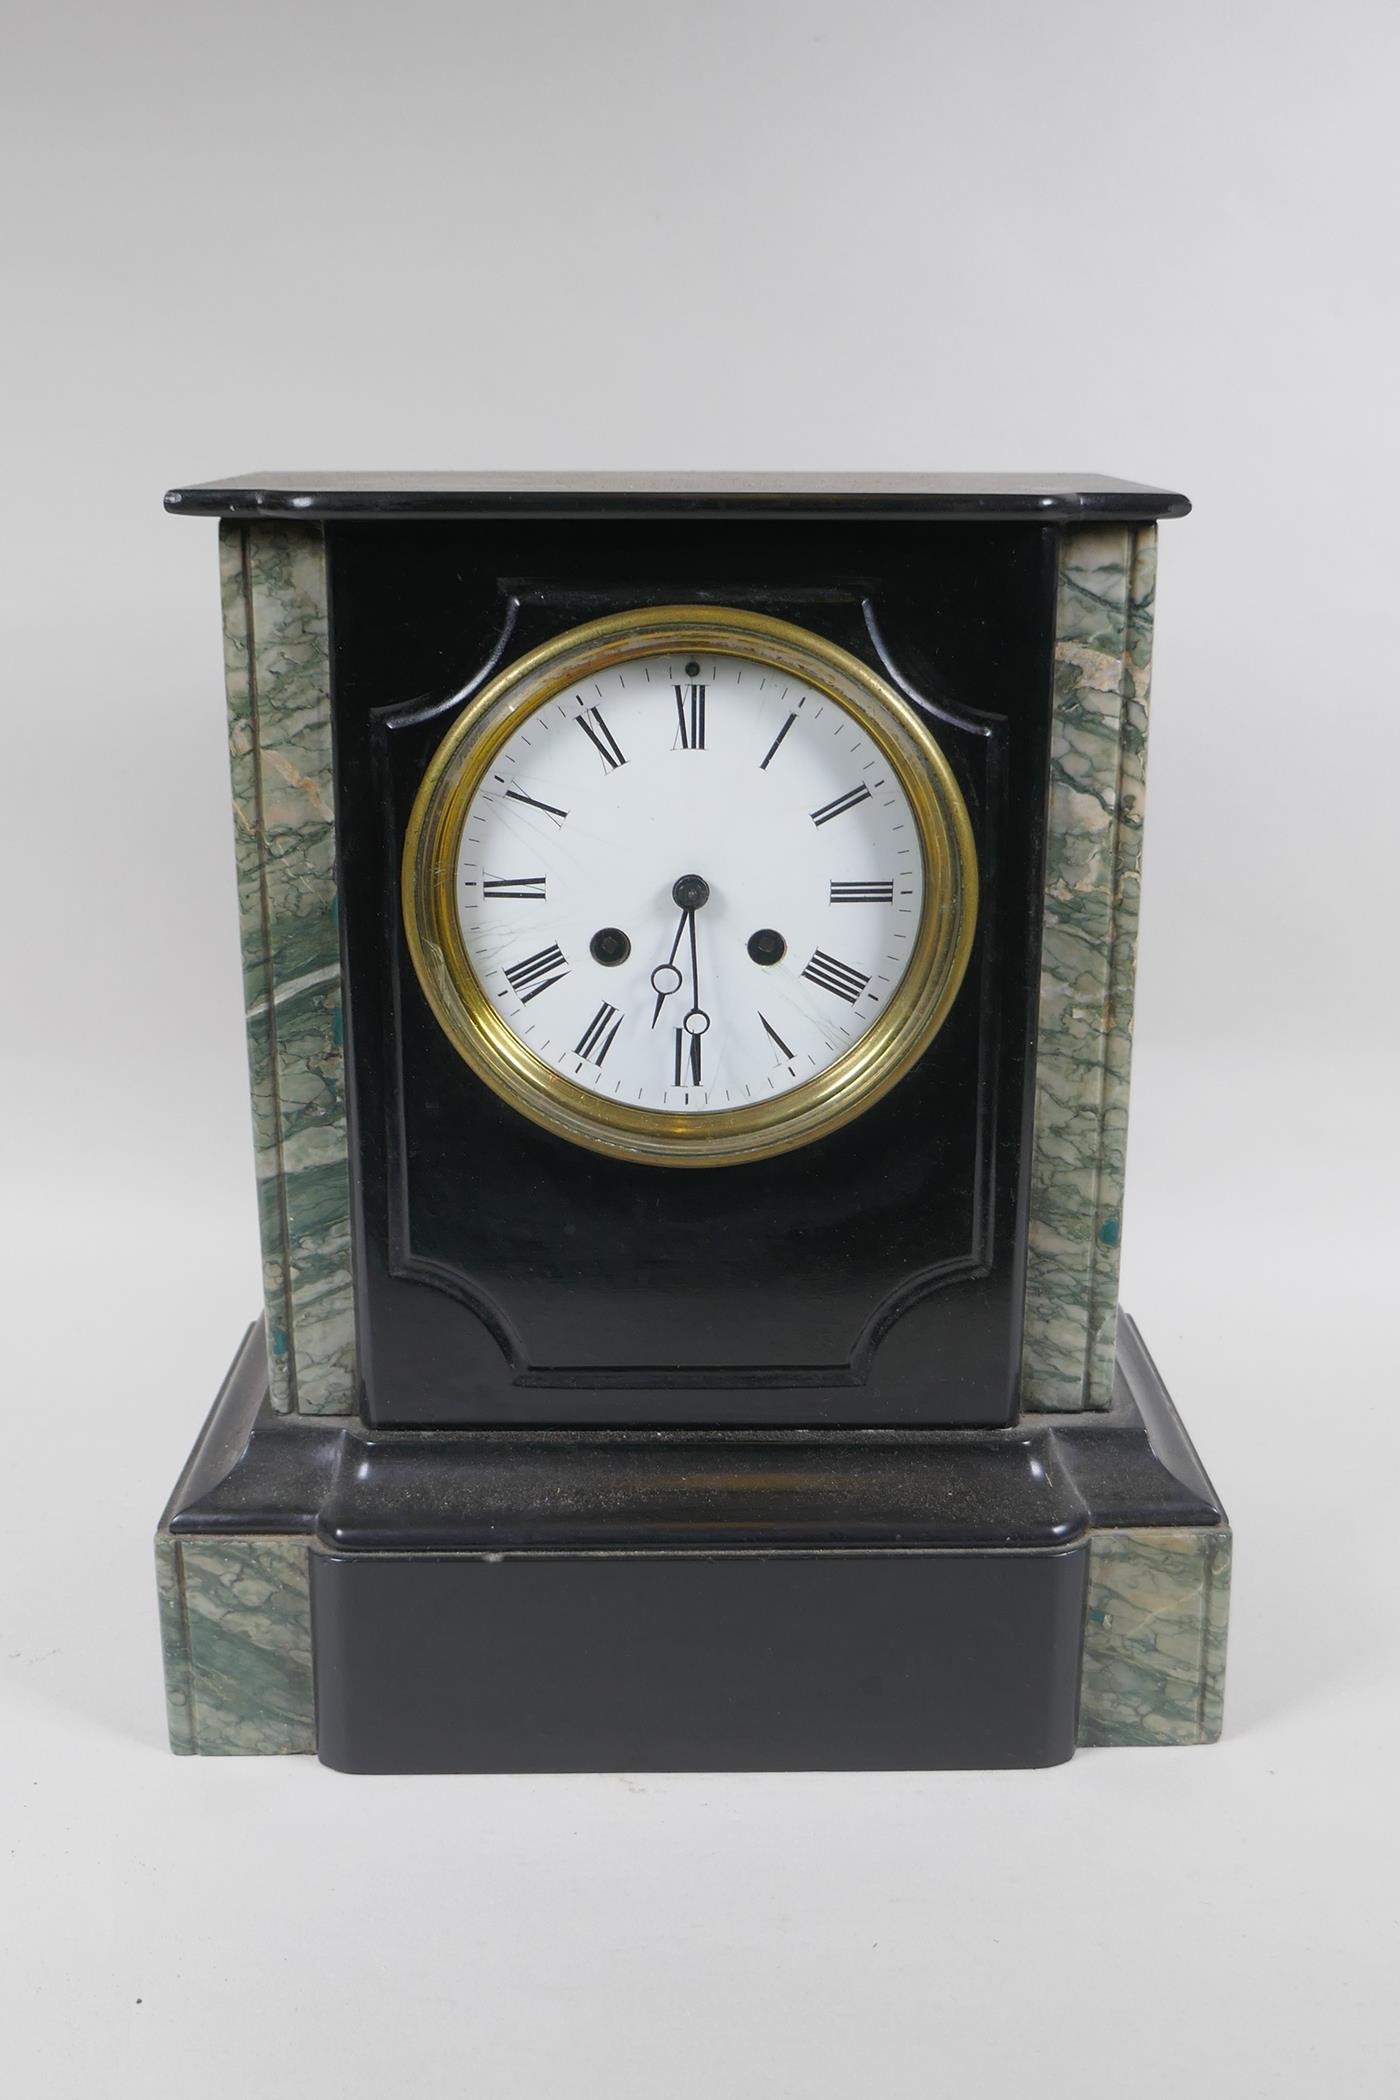 A late C19th French slate mantel clock, with an enamel dial and Roman numerals, the movement